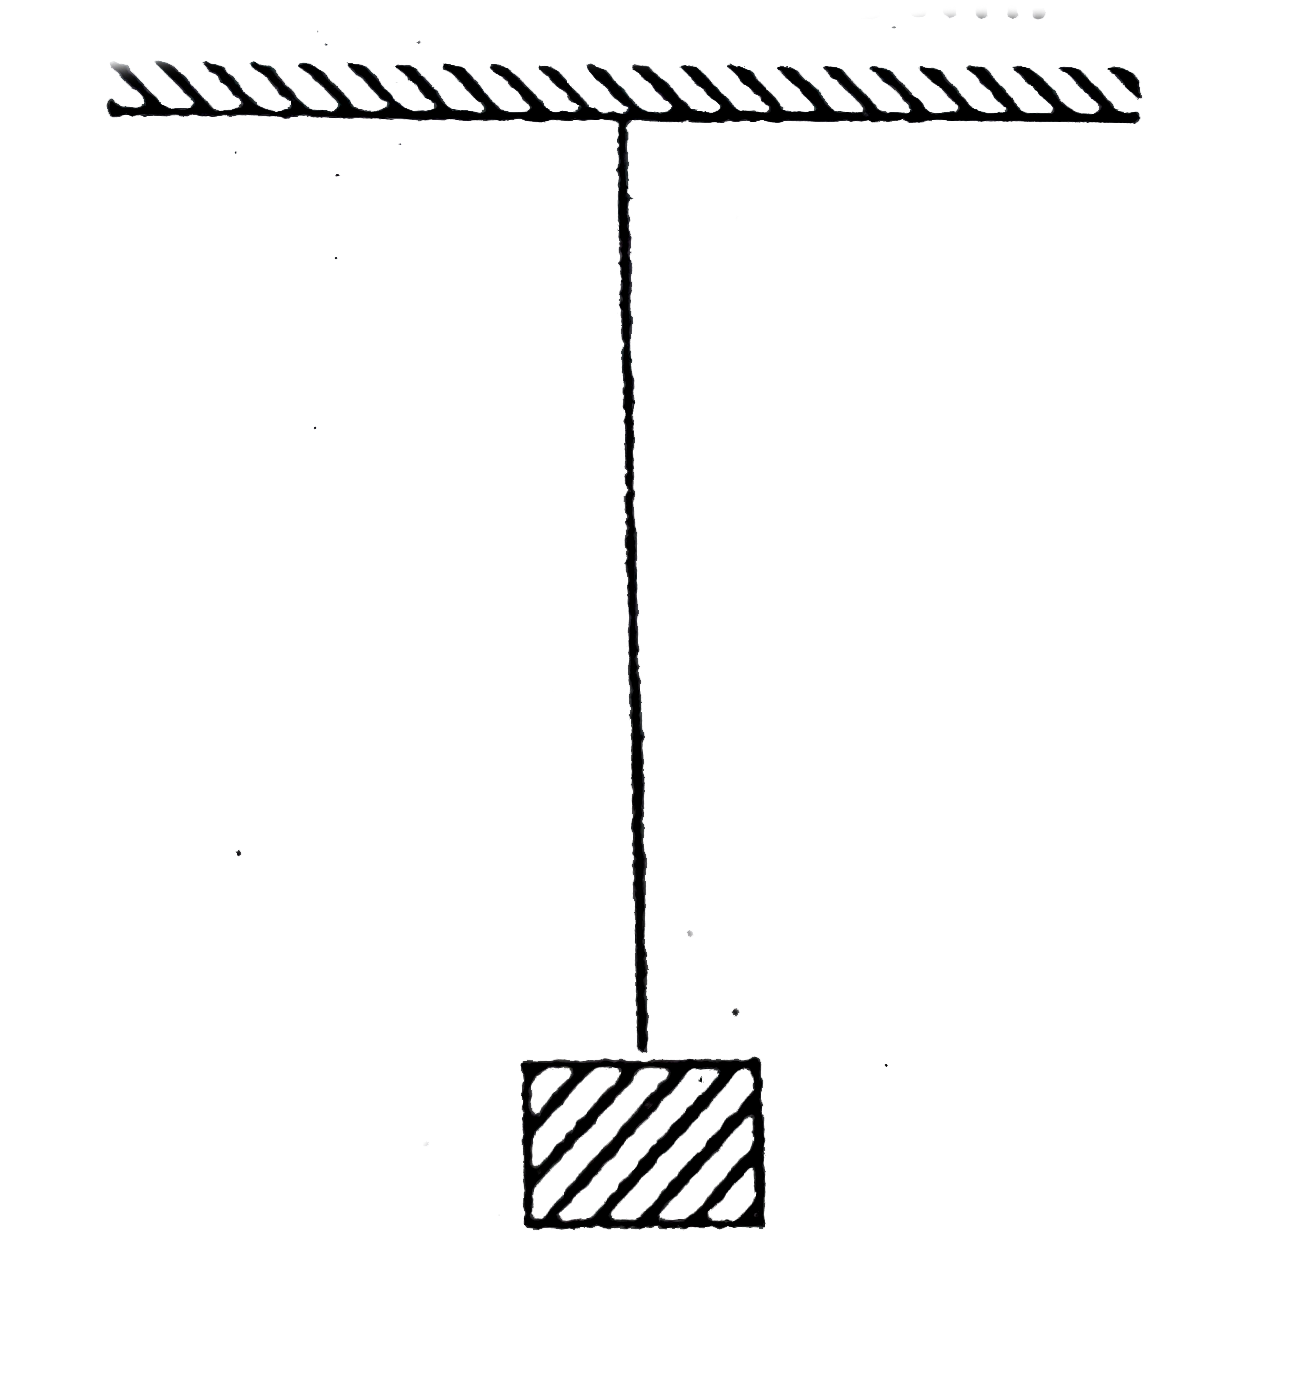 A wave pulse is generated at the bottom of a uniform string (of mass m and length l) Suspended from ceiling and supporting a block (of mass m) as shown.